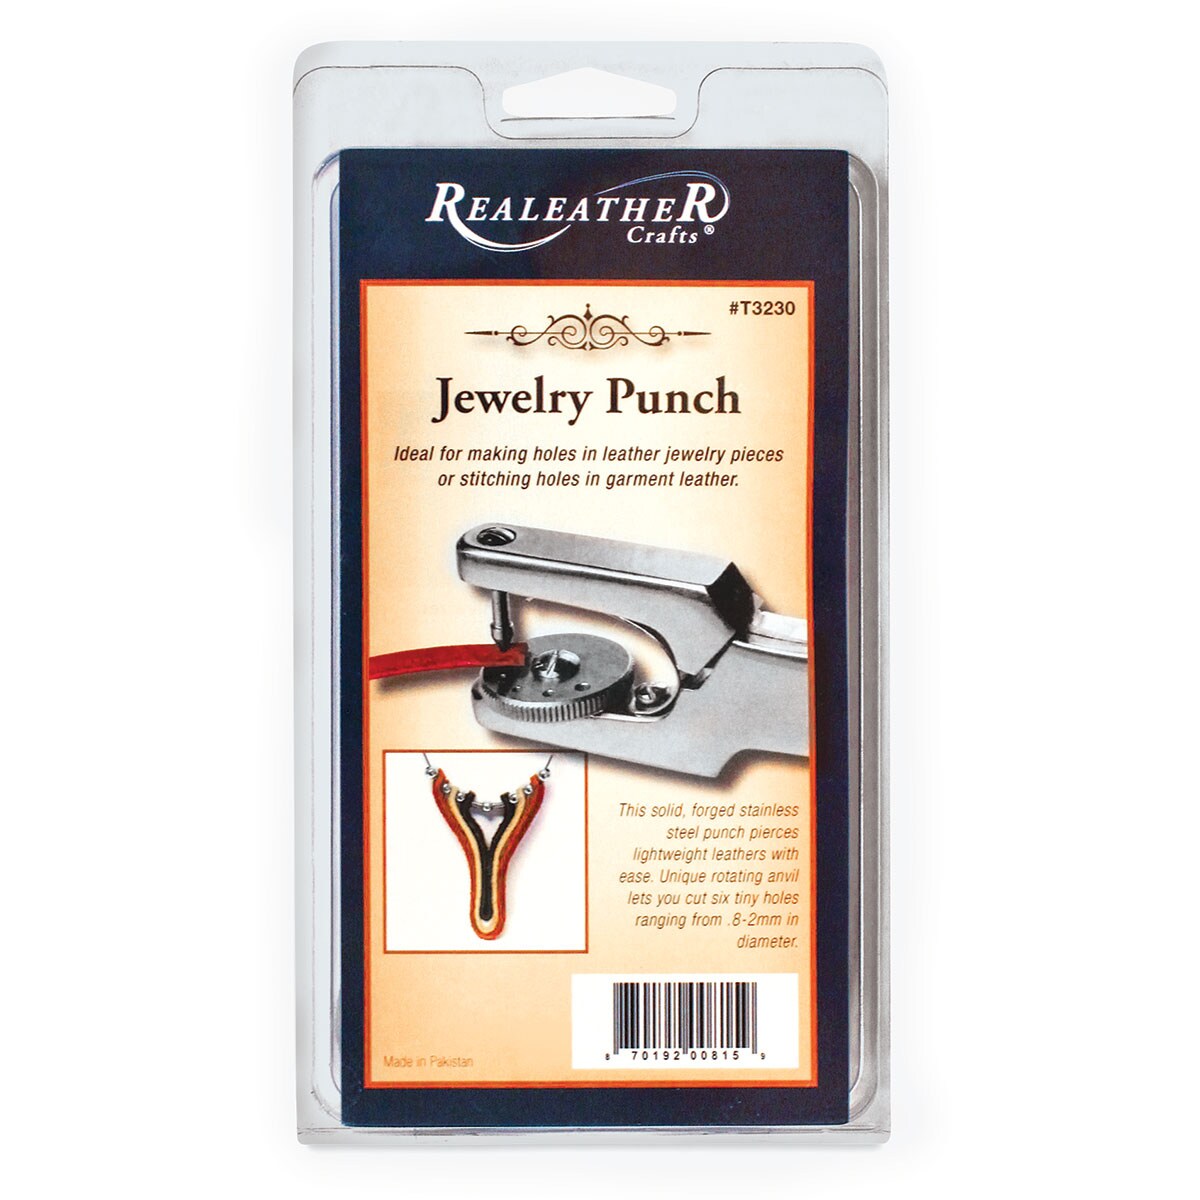 Realeather Leather Punch Tools - Jewelry Punch